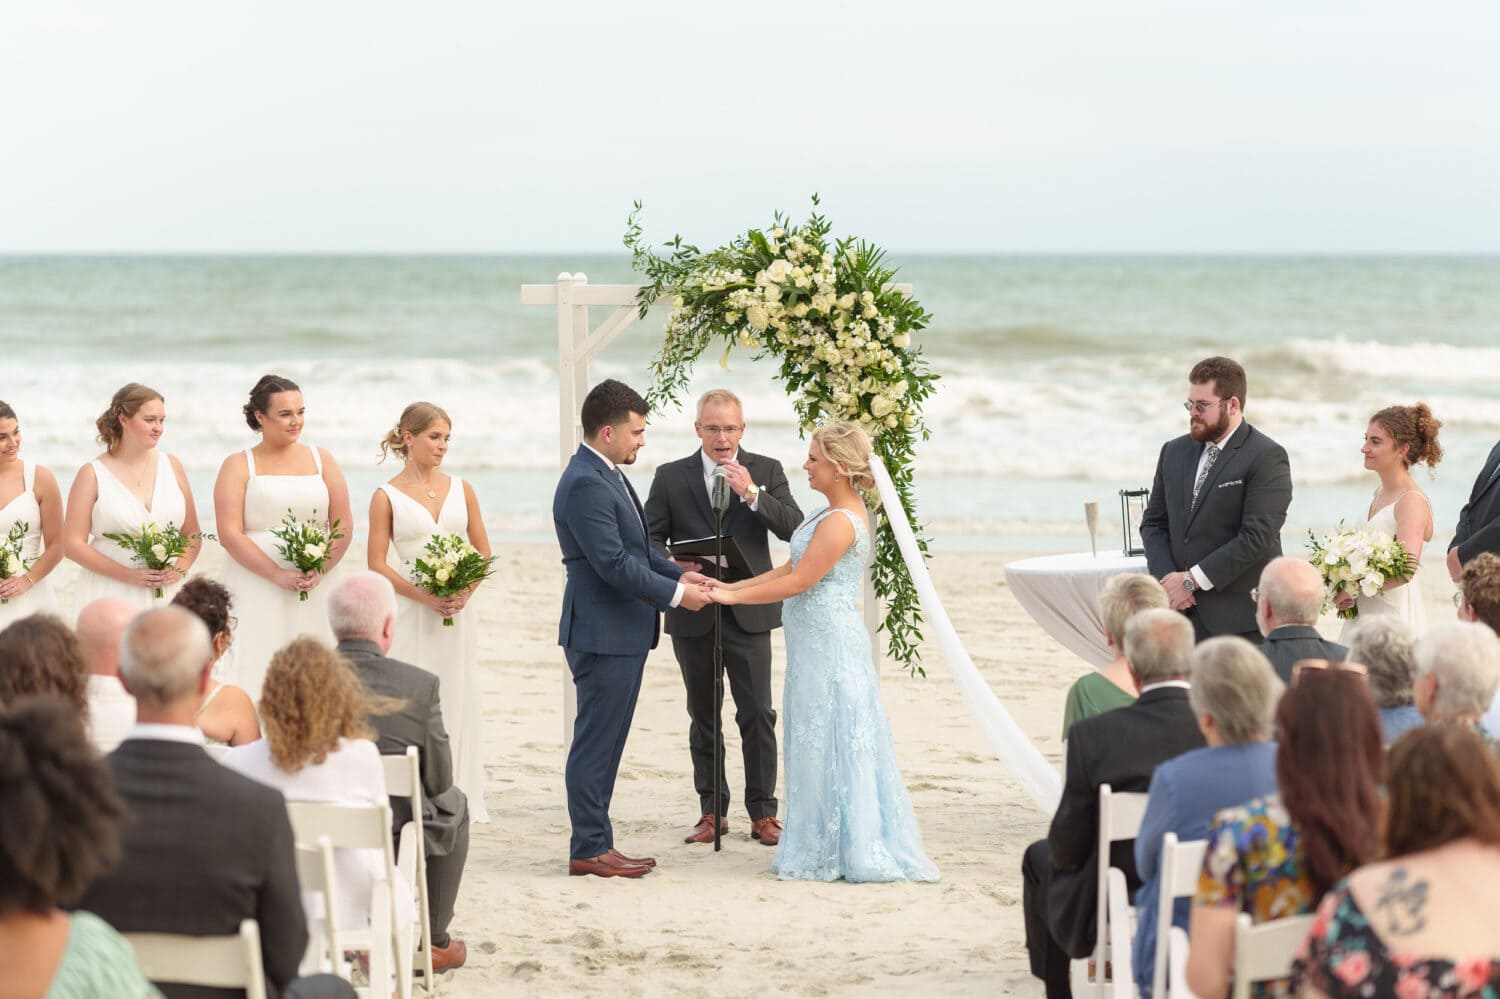 Holding hands during the ceremony - Hilton Myrtle Beach Resort